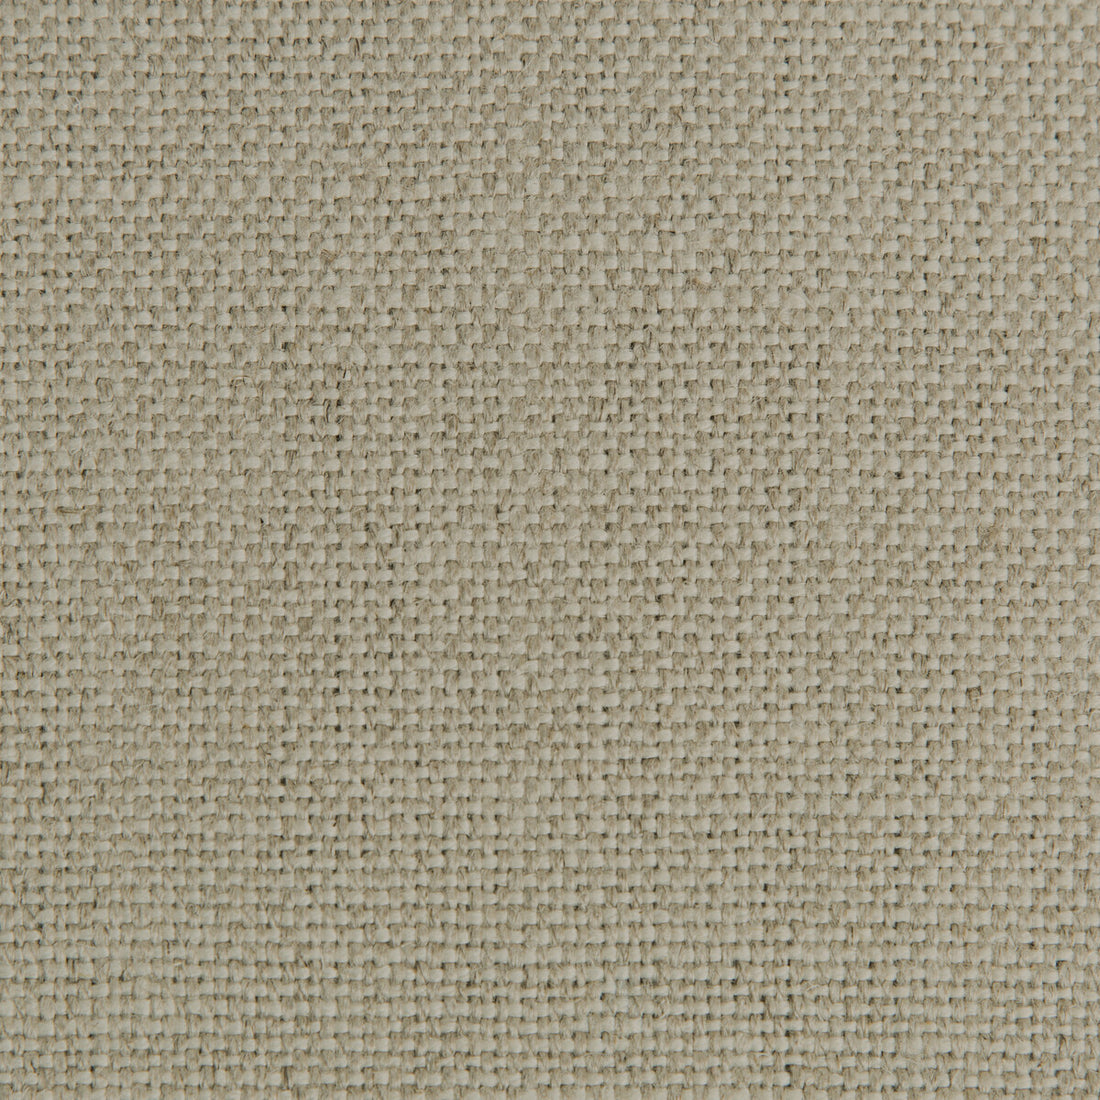 Stone Harbor fabric in linen color - pattern 27591.161.0 - by Kravet Basics in the The Complete Linen IV collection